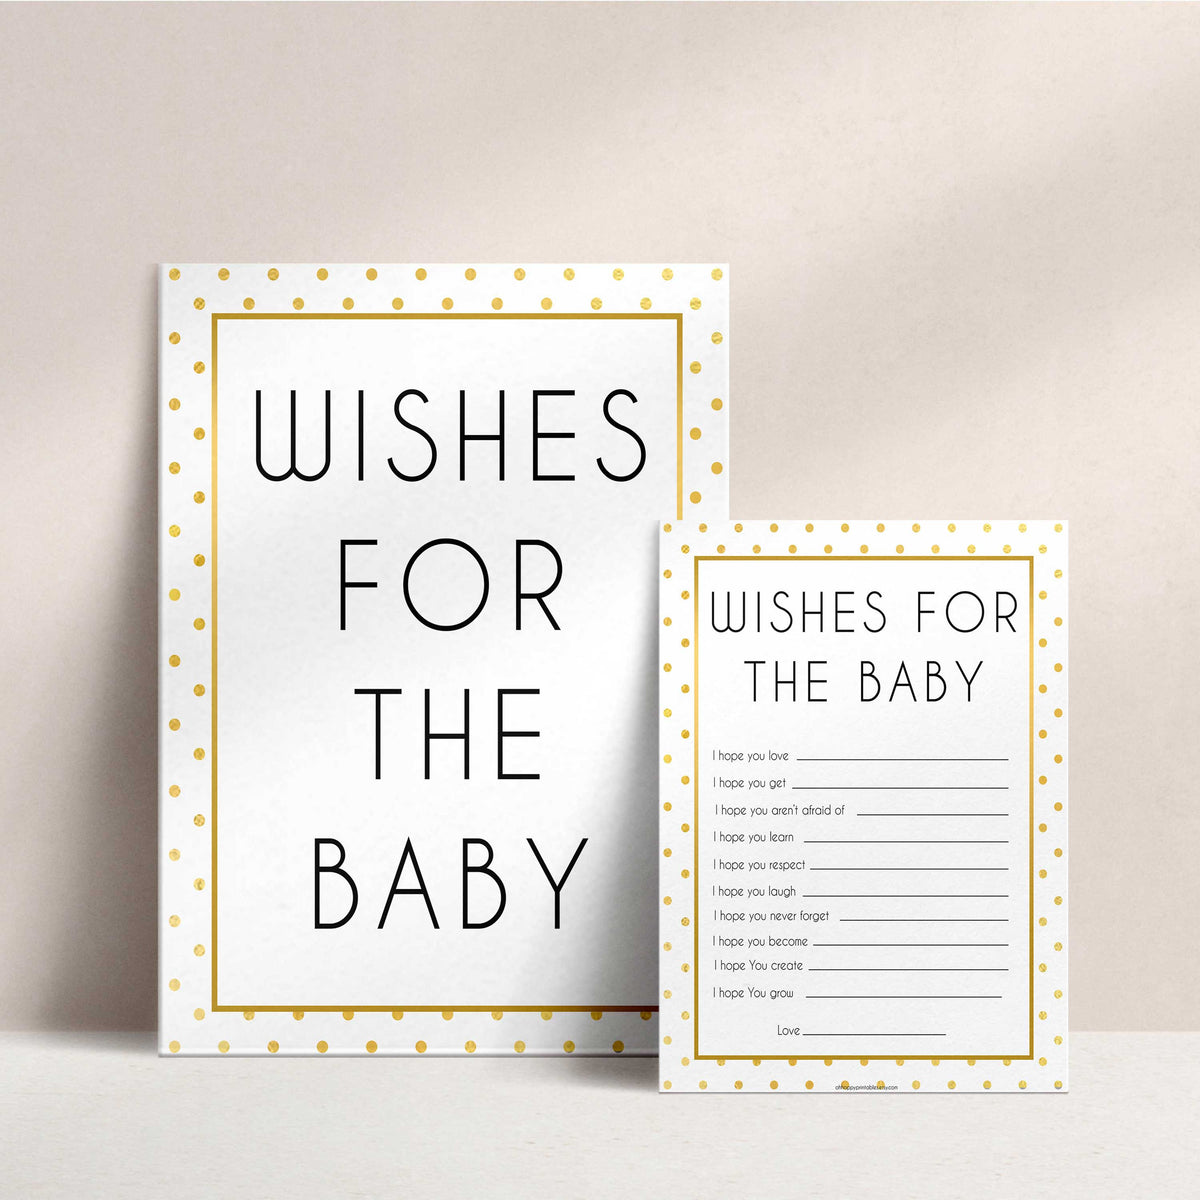 wishes for the baby, baby wishes game, Printable baby shower games, baby gold dots fun baby games, baby shower games, fun baby shower ideas, top baby shower ideas, gold glitter shower baby shower, friends baby shower ideas